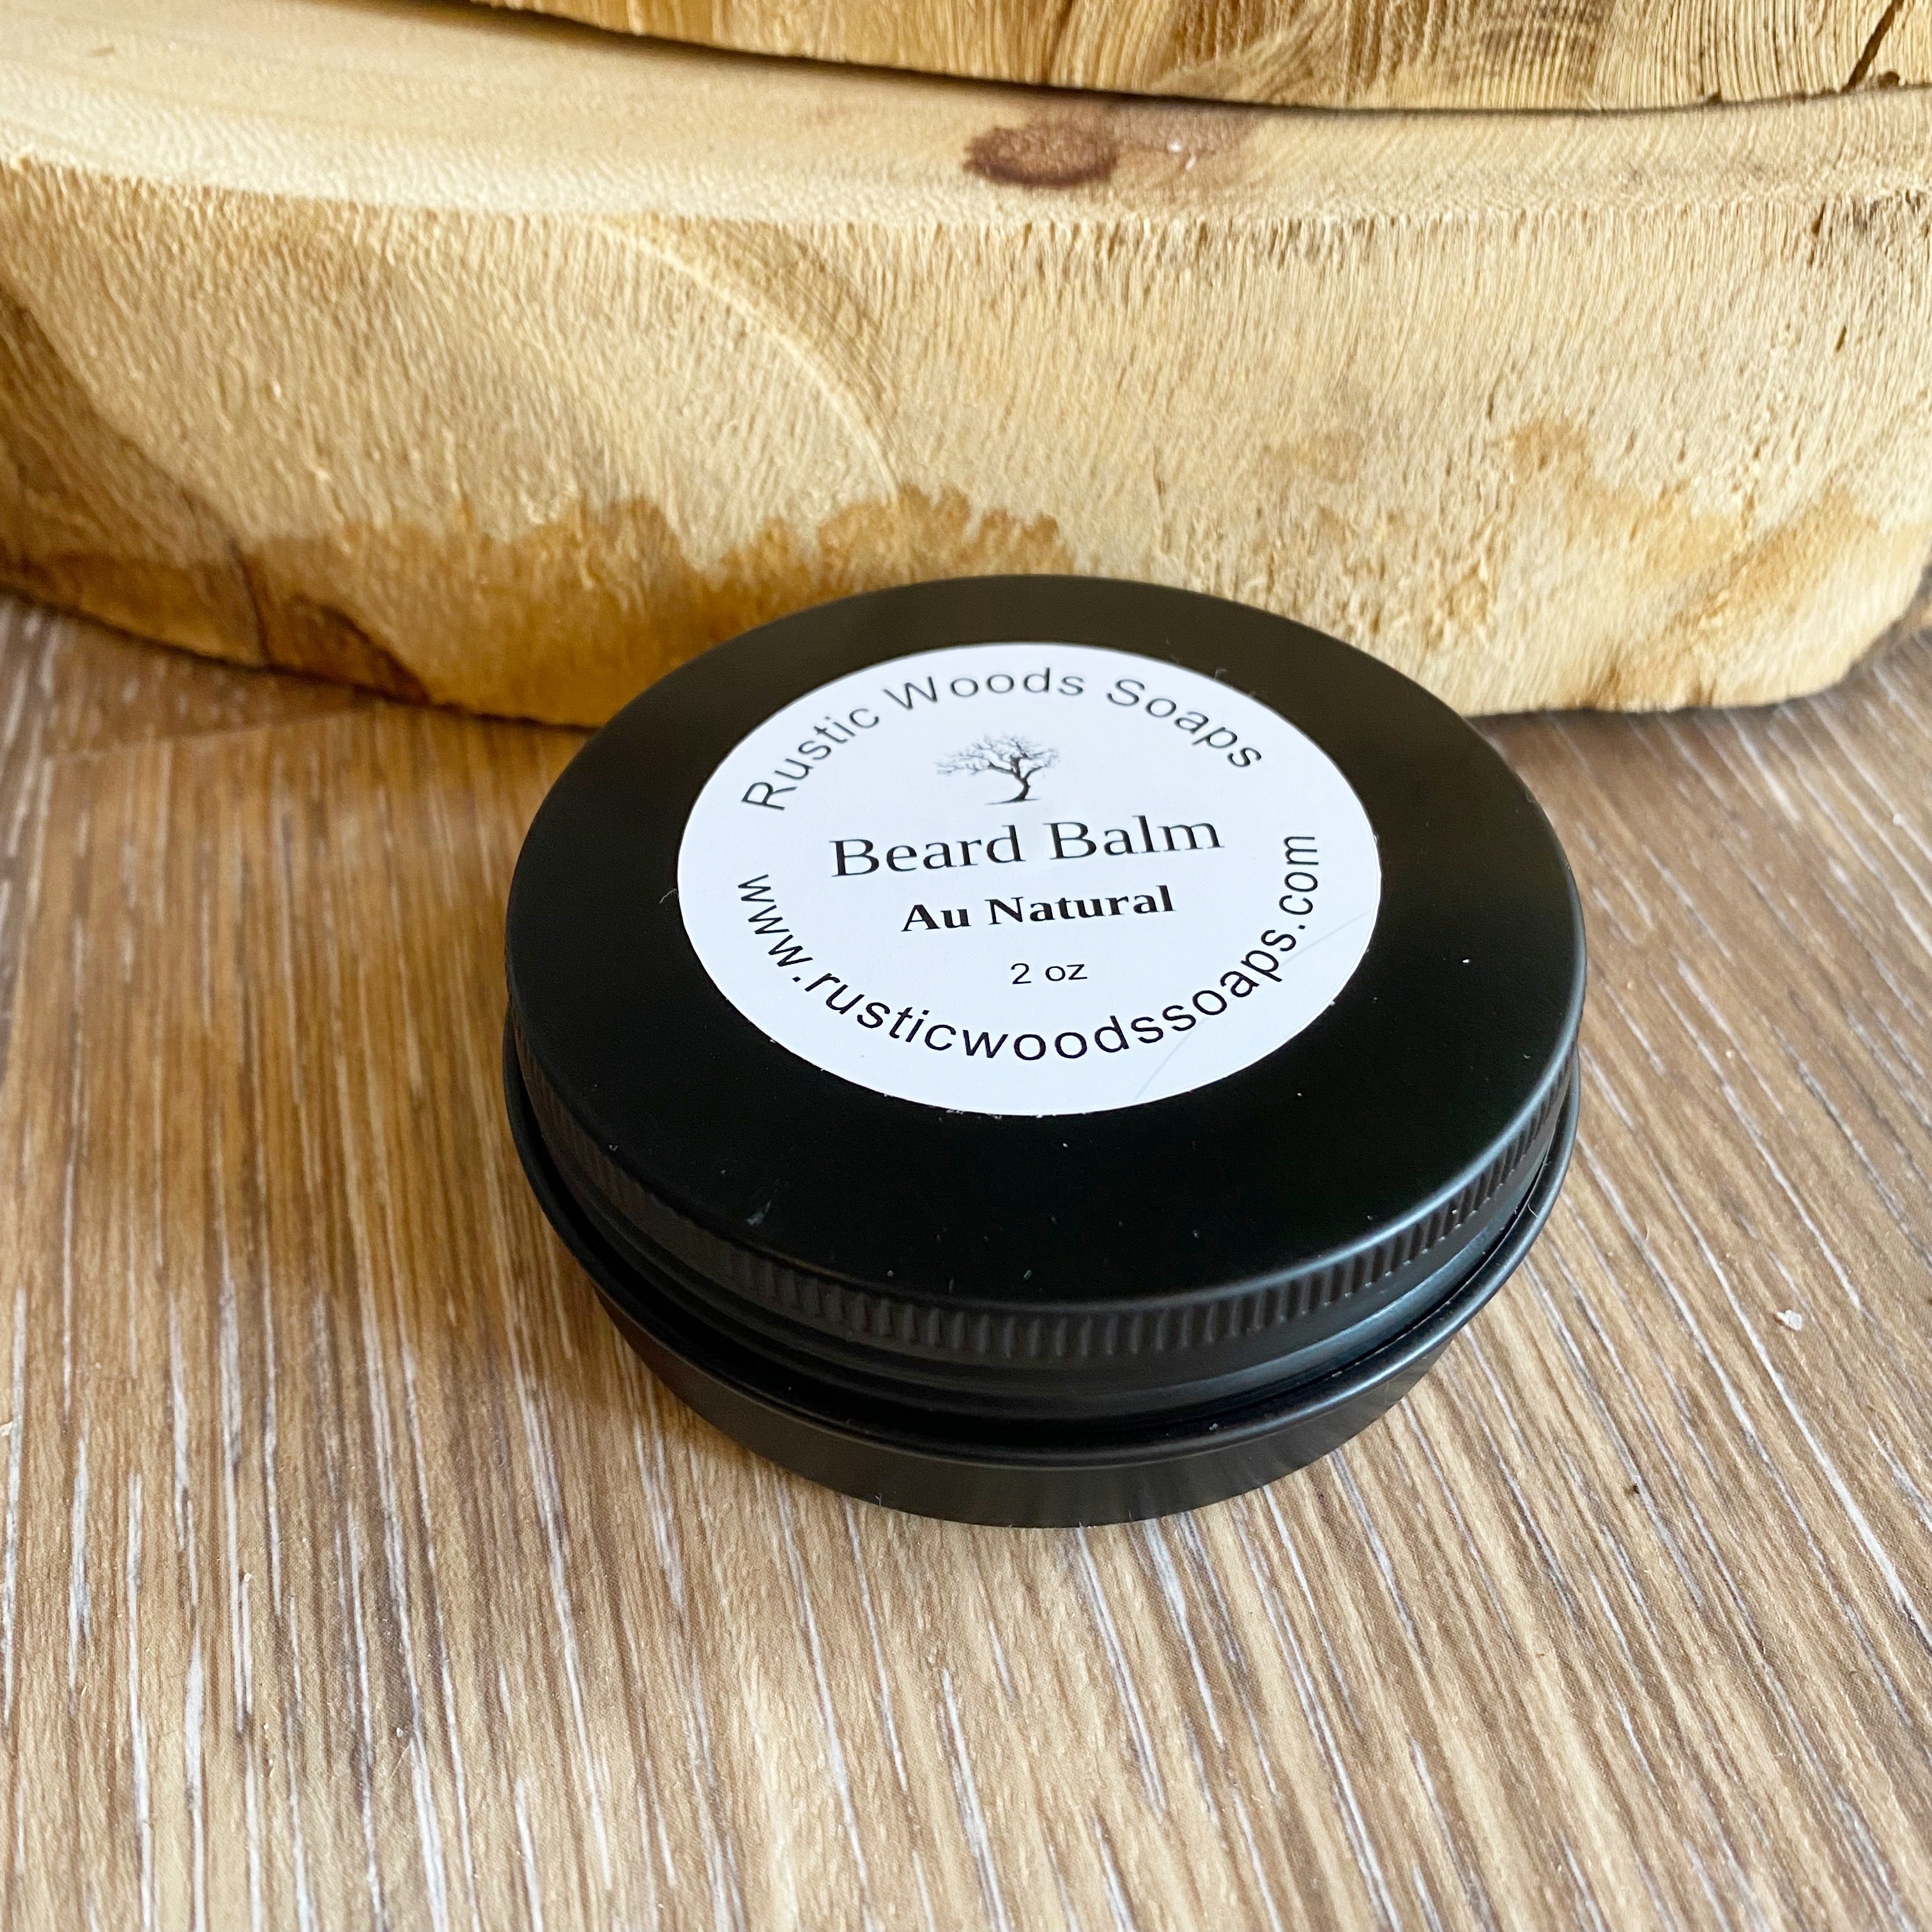 Black canister jar with white rustic woods soaps au natural beard balm label sits on wood surface